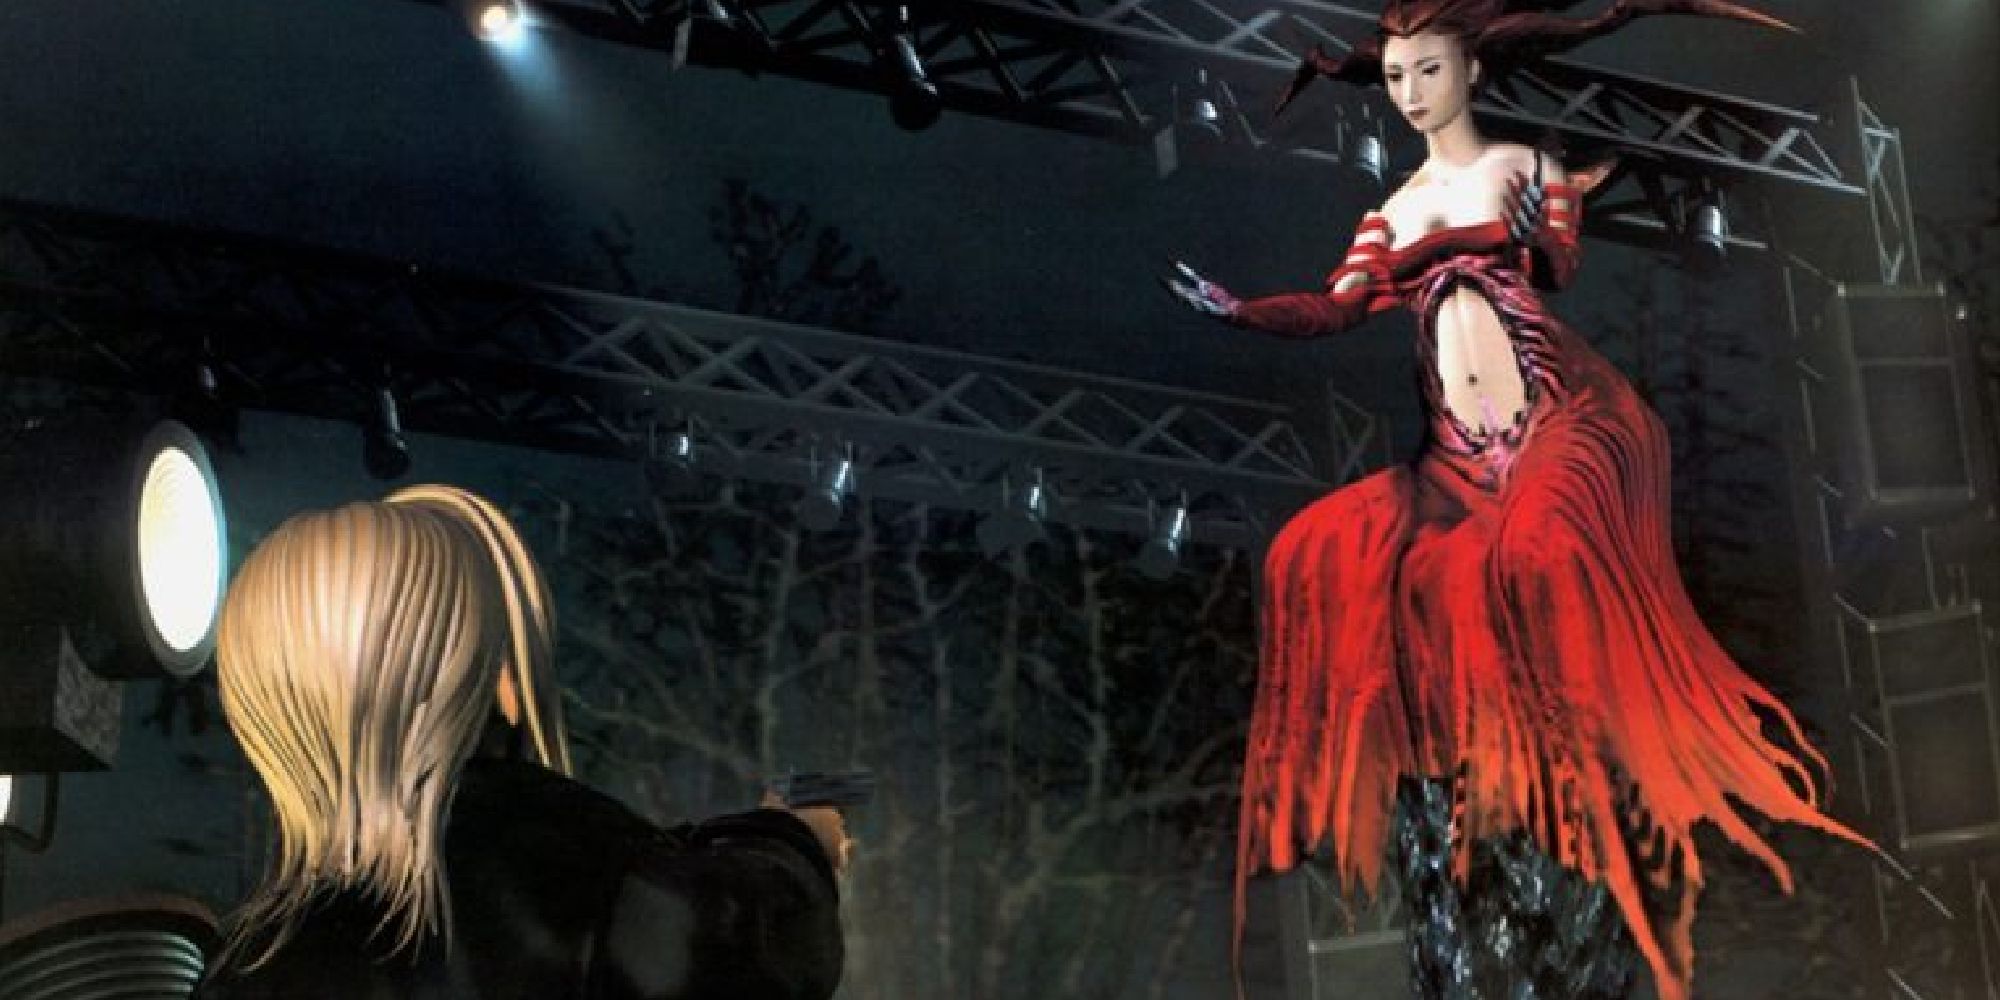 The protagonist of Parasite Eve faces a woman in red who looms over her.